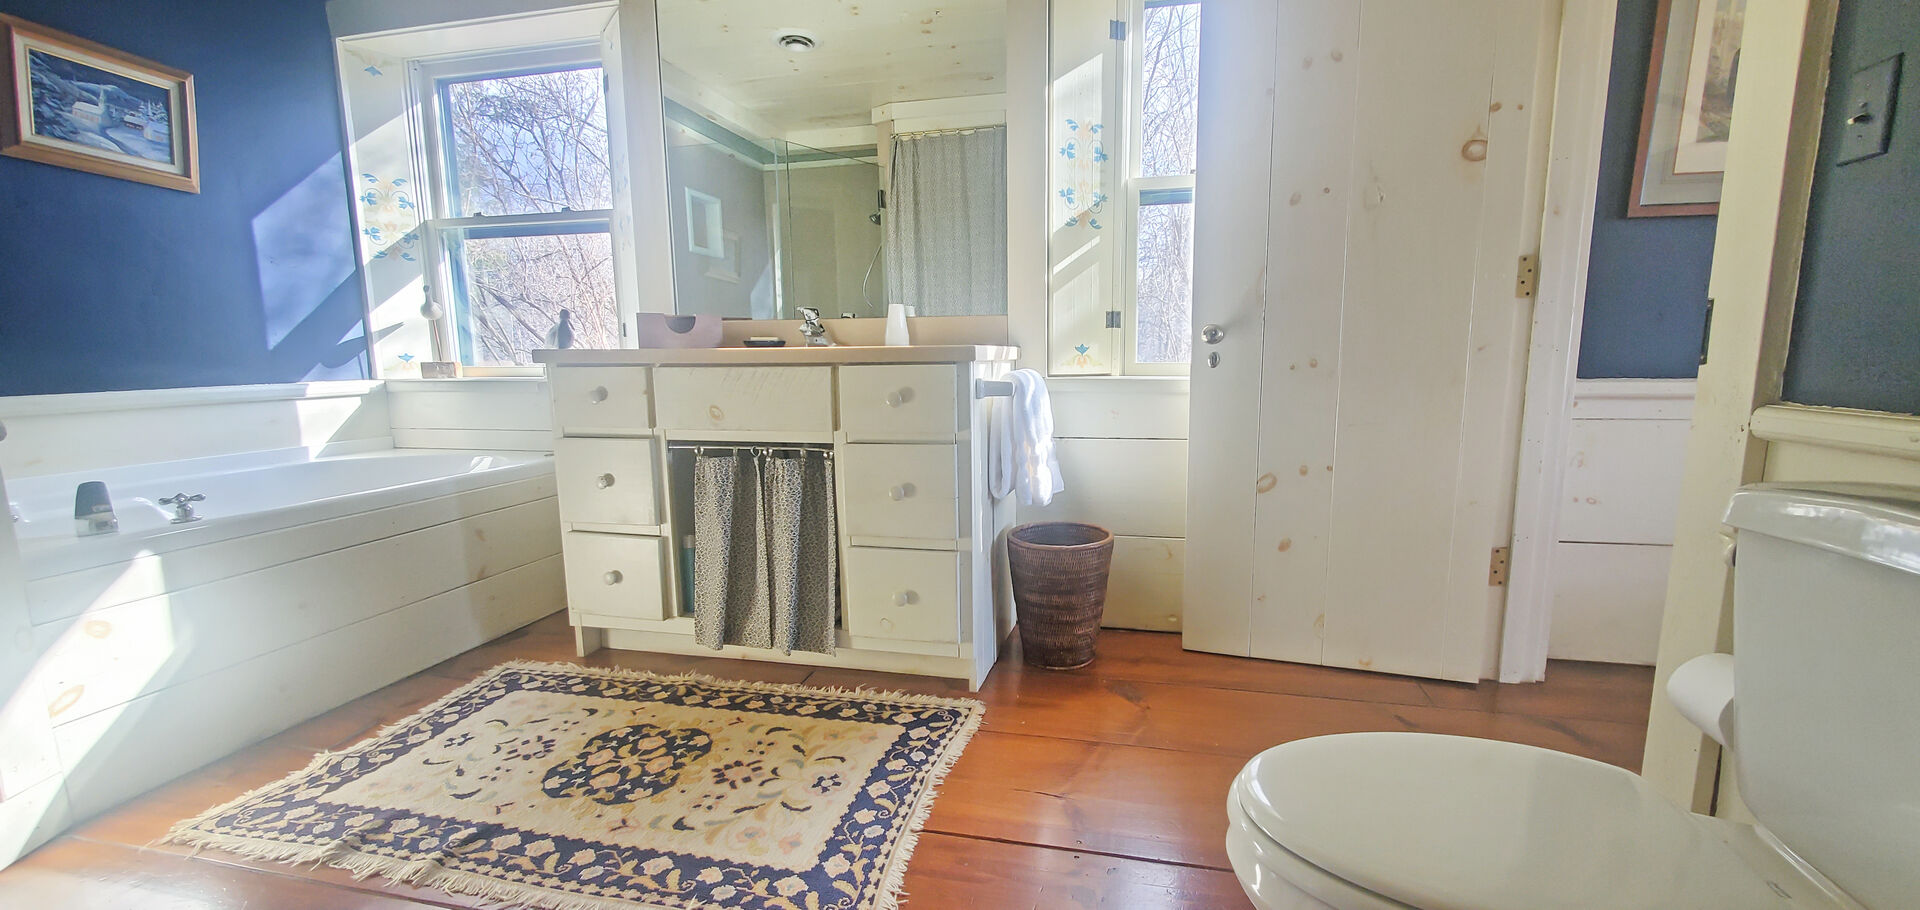 Private Full Bathroom tub and stand up shower and washer and dryer